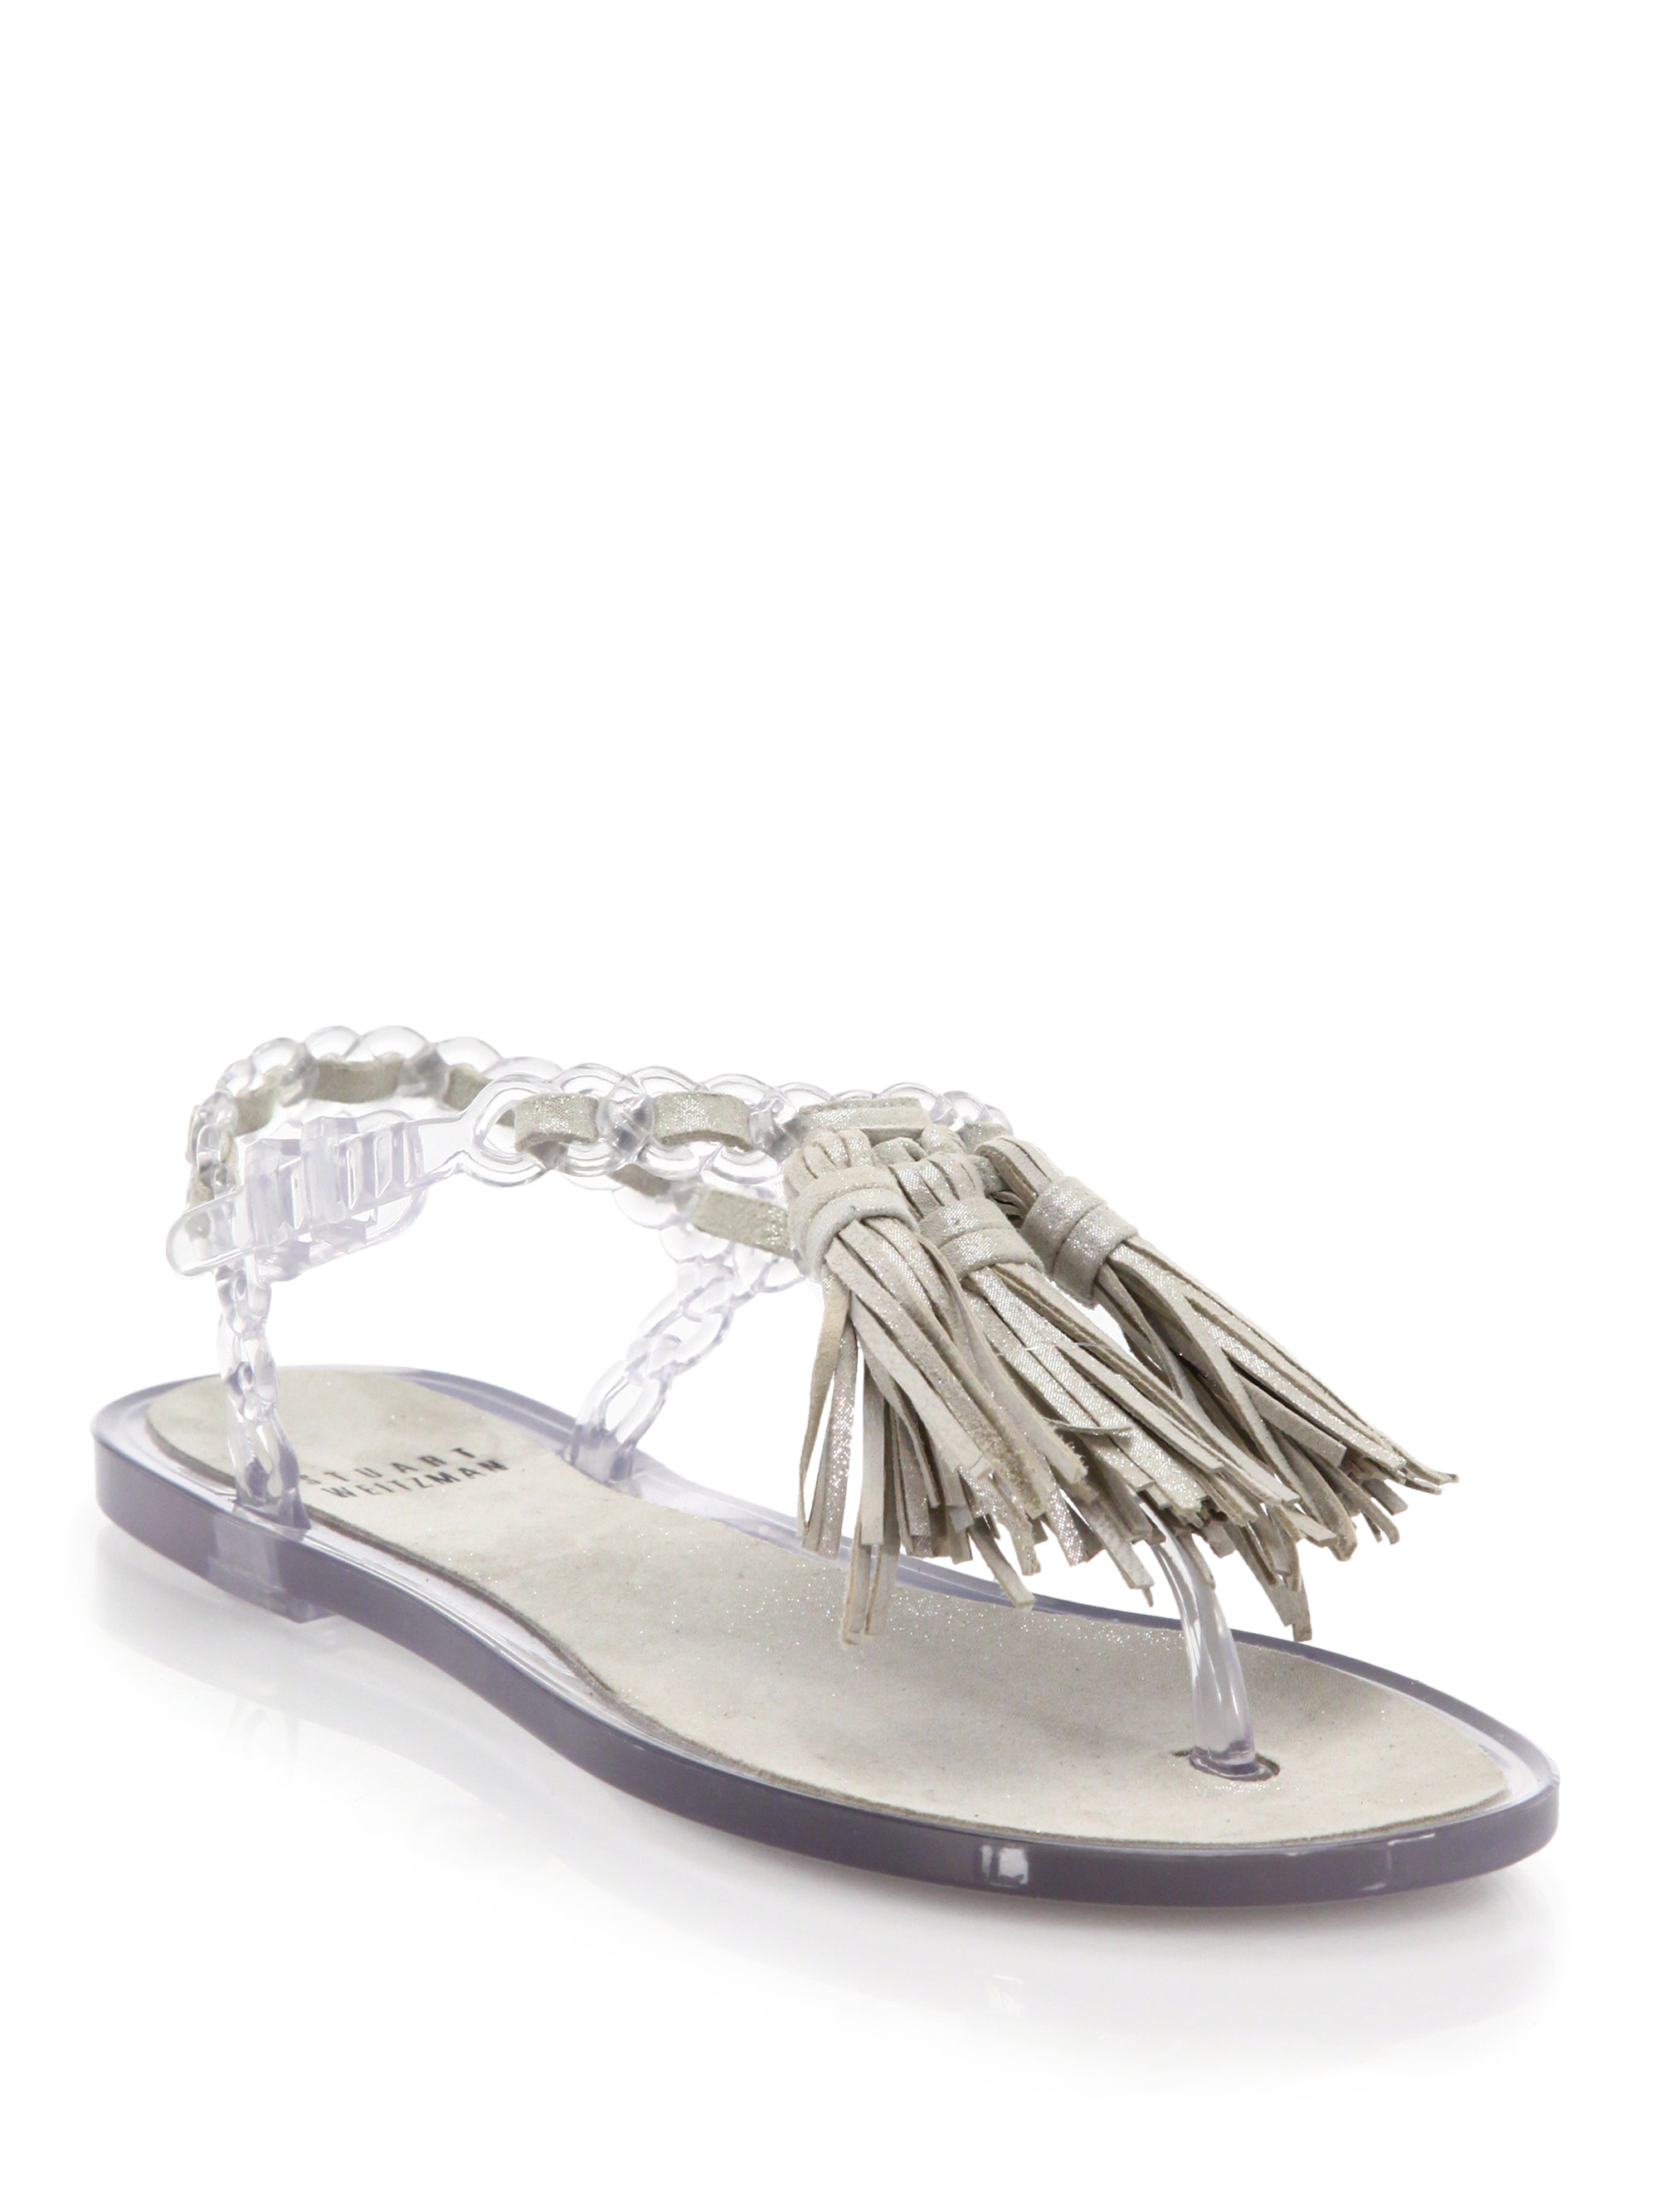 Lyst - Stuart Weitzman Gelati Leather-woven Jelly Thong Sandals in Gray